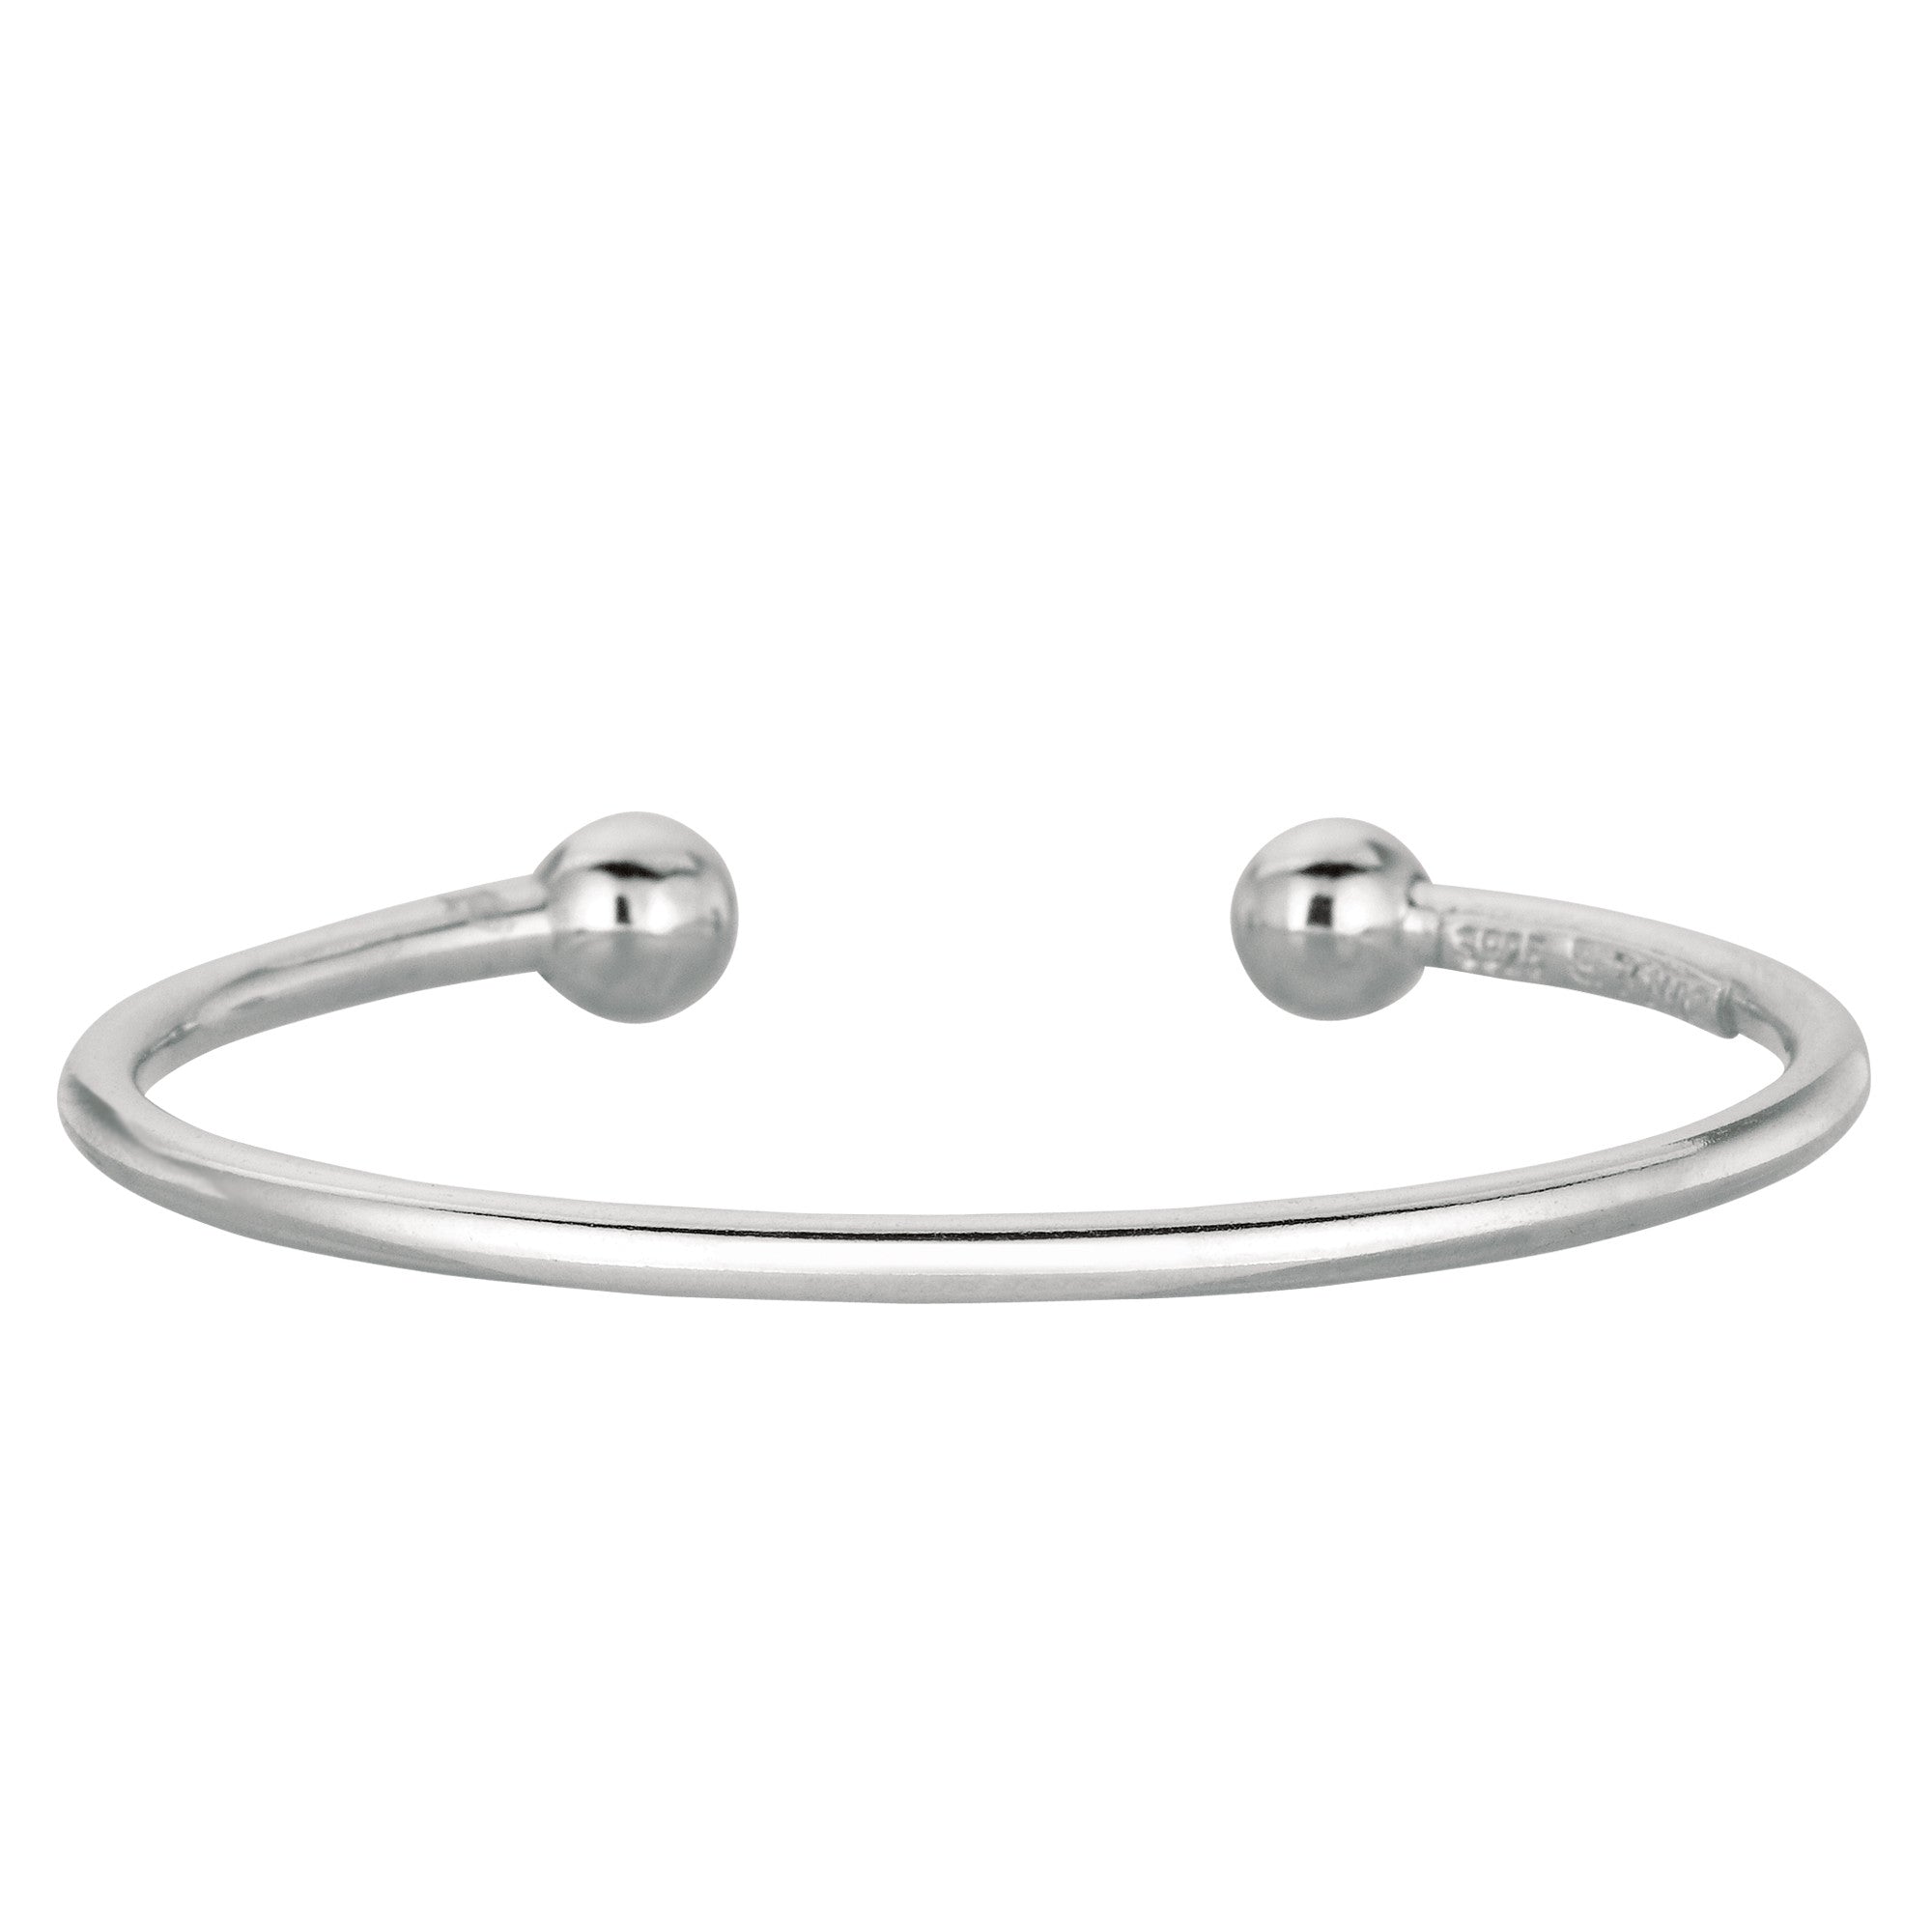 Baby Cuff Bangle In Sterling Silver - 5.5 Inch fine designer jewelry for men and women